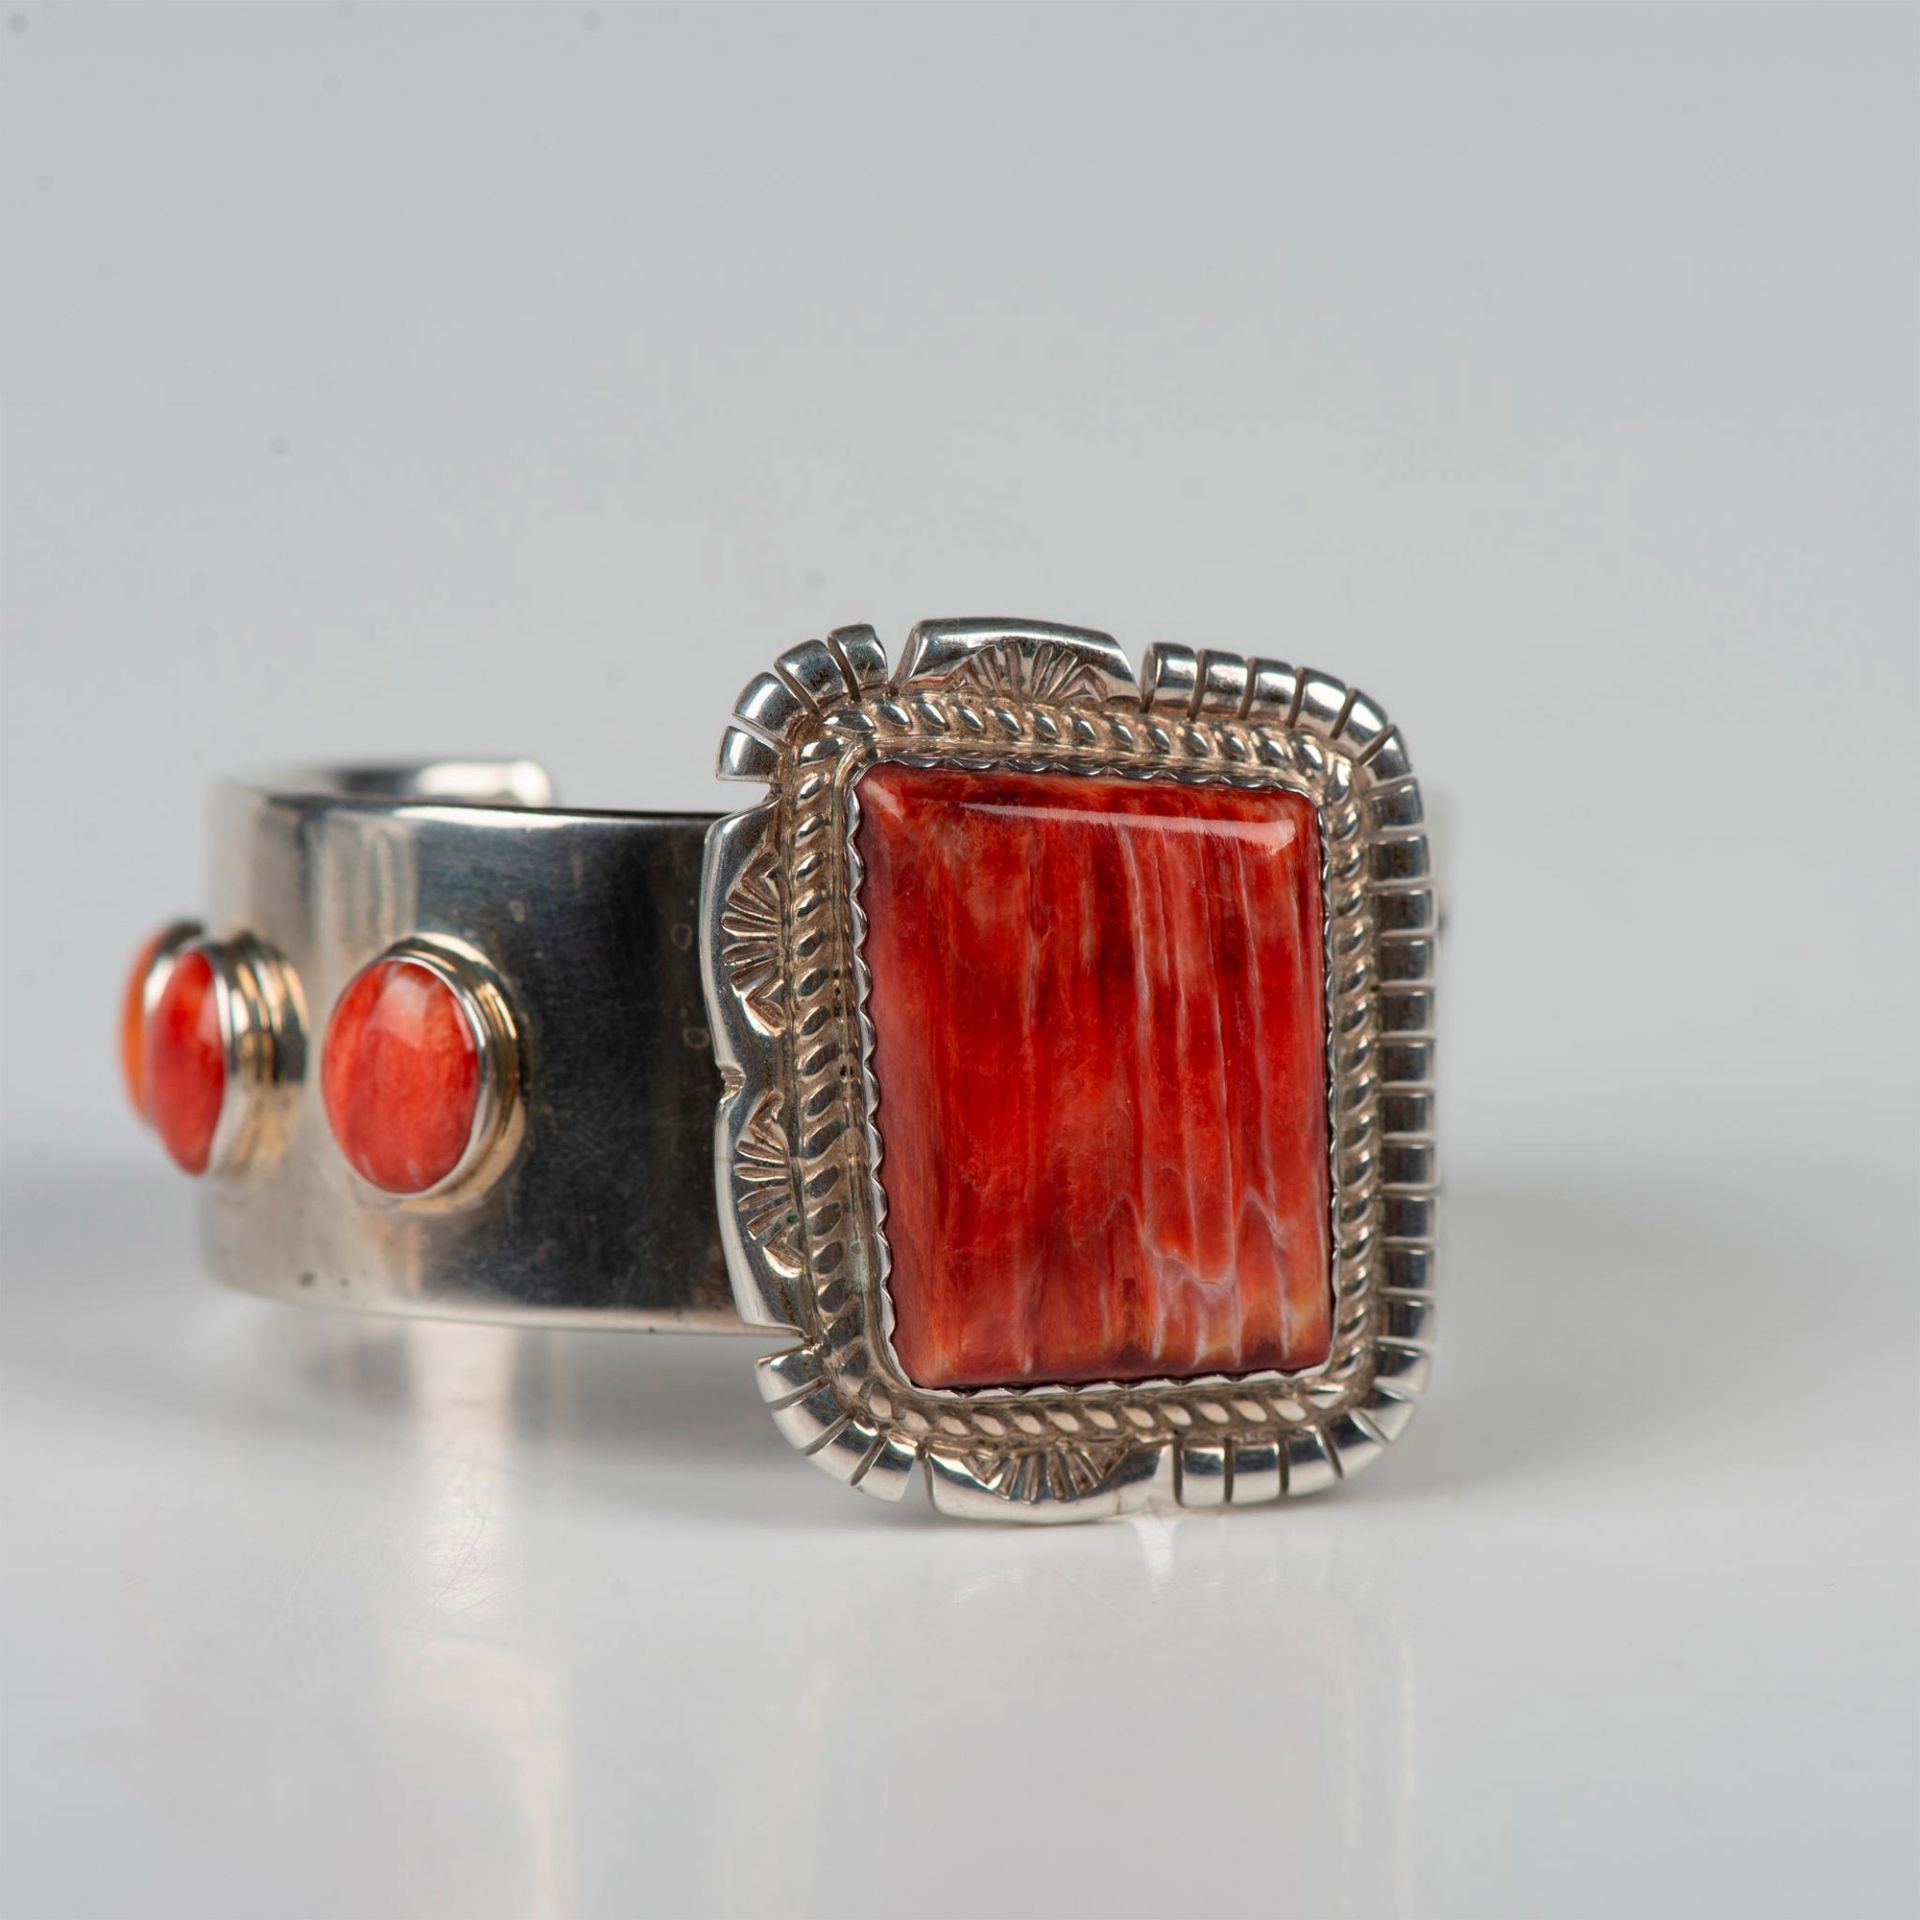 Ca'Win Pueblo Sterling Silver Red Spiny Oyster Cuff Bracelet - Image 2 of 7